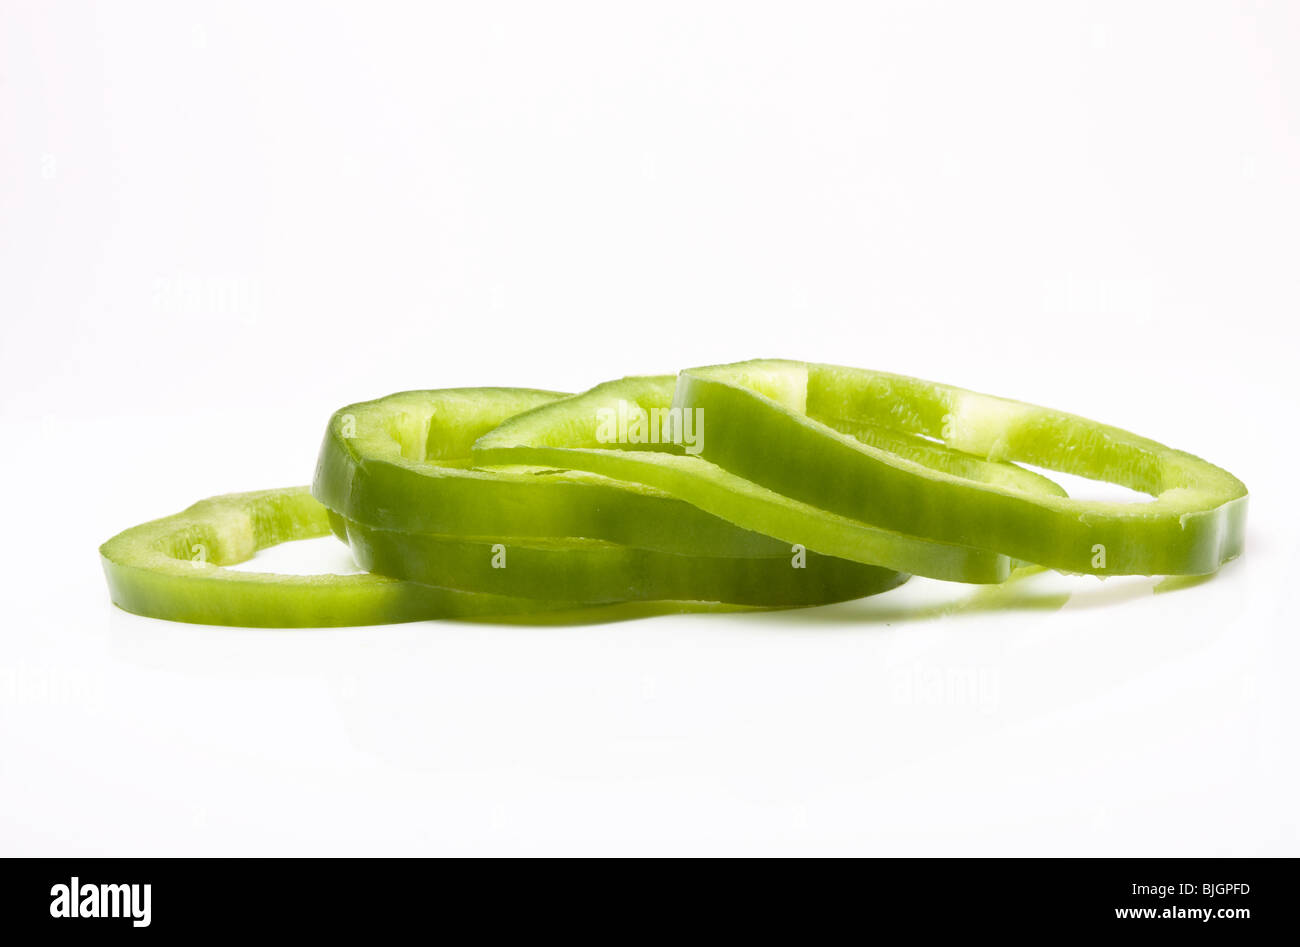 Sliced Green Peppers arranged on white background. Stock Photo